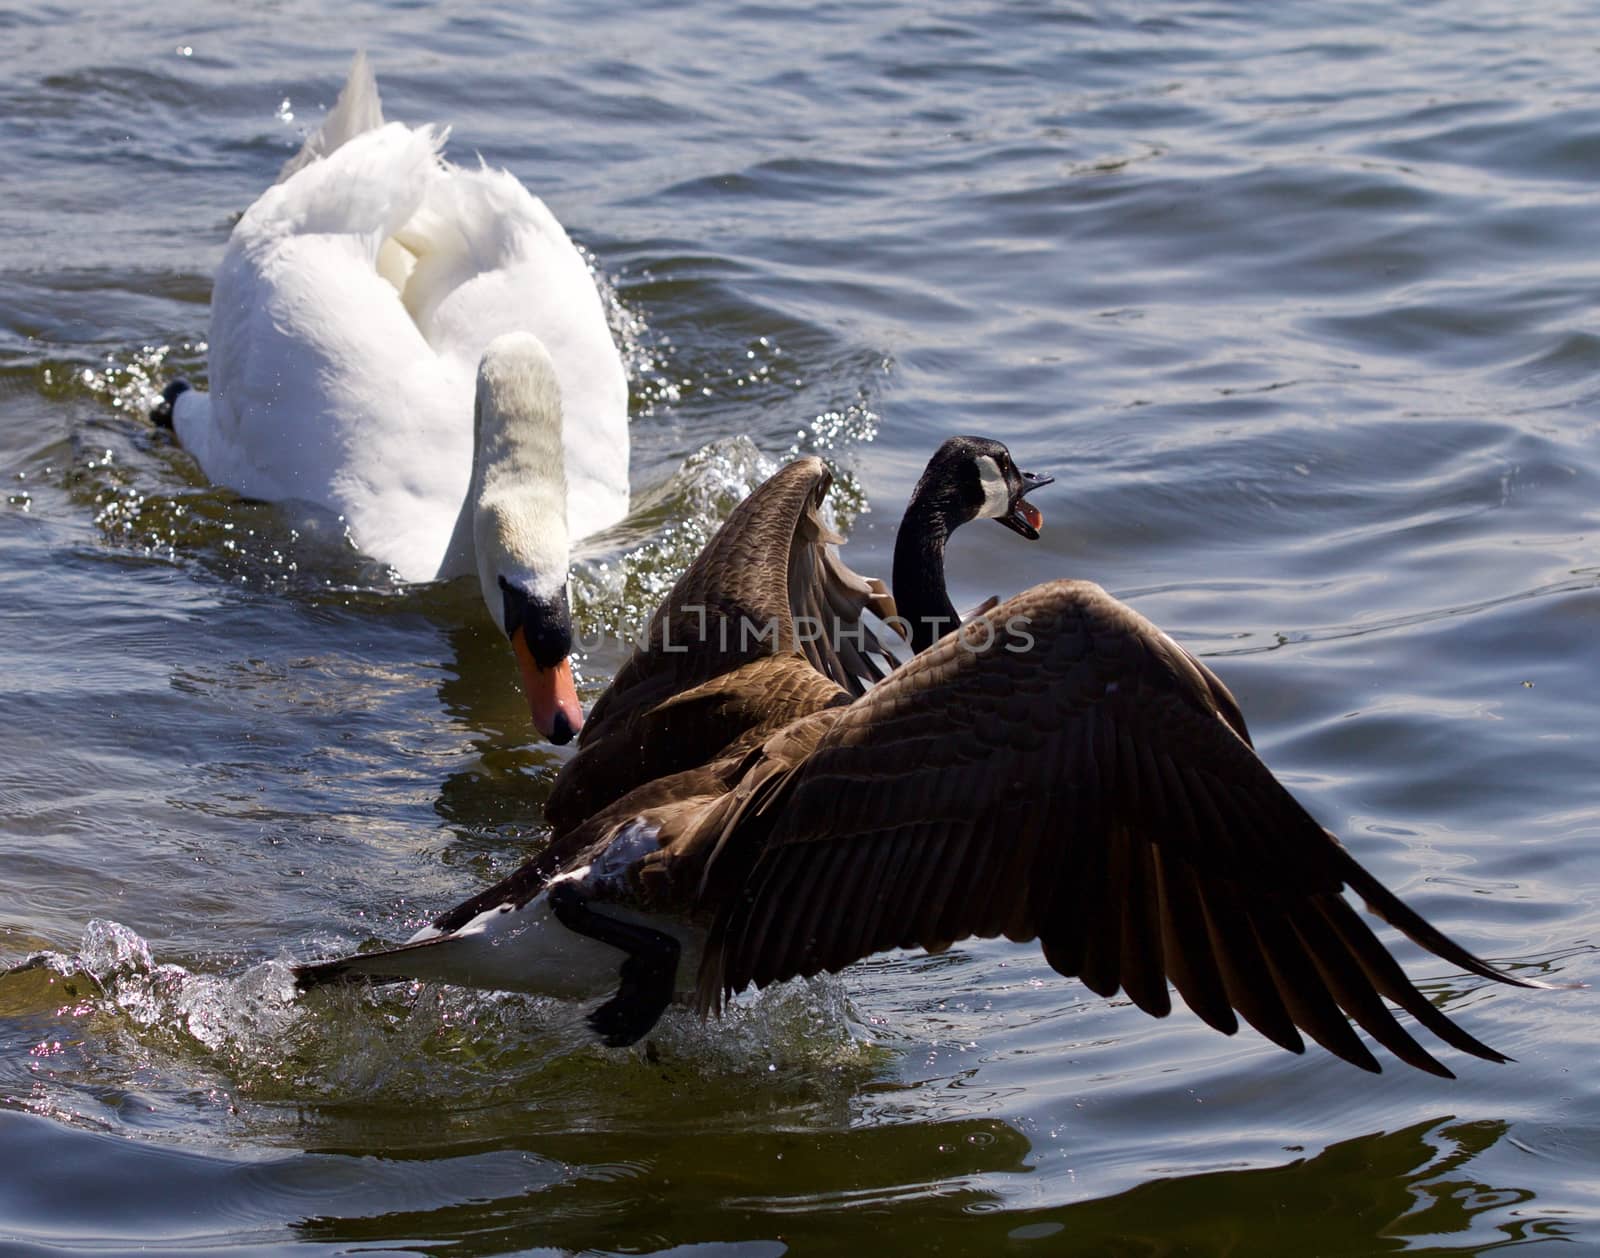 Amazing emotional moment with the swan attacking the Canada goose